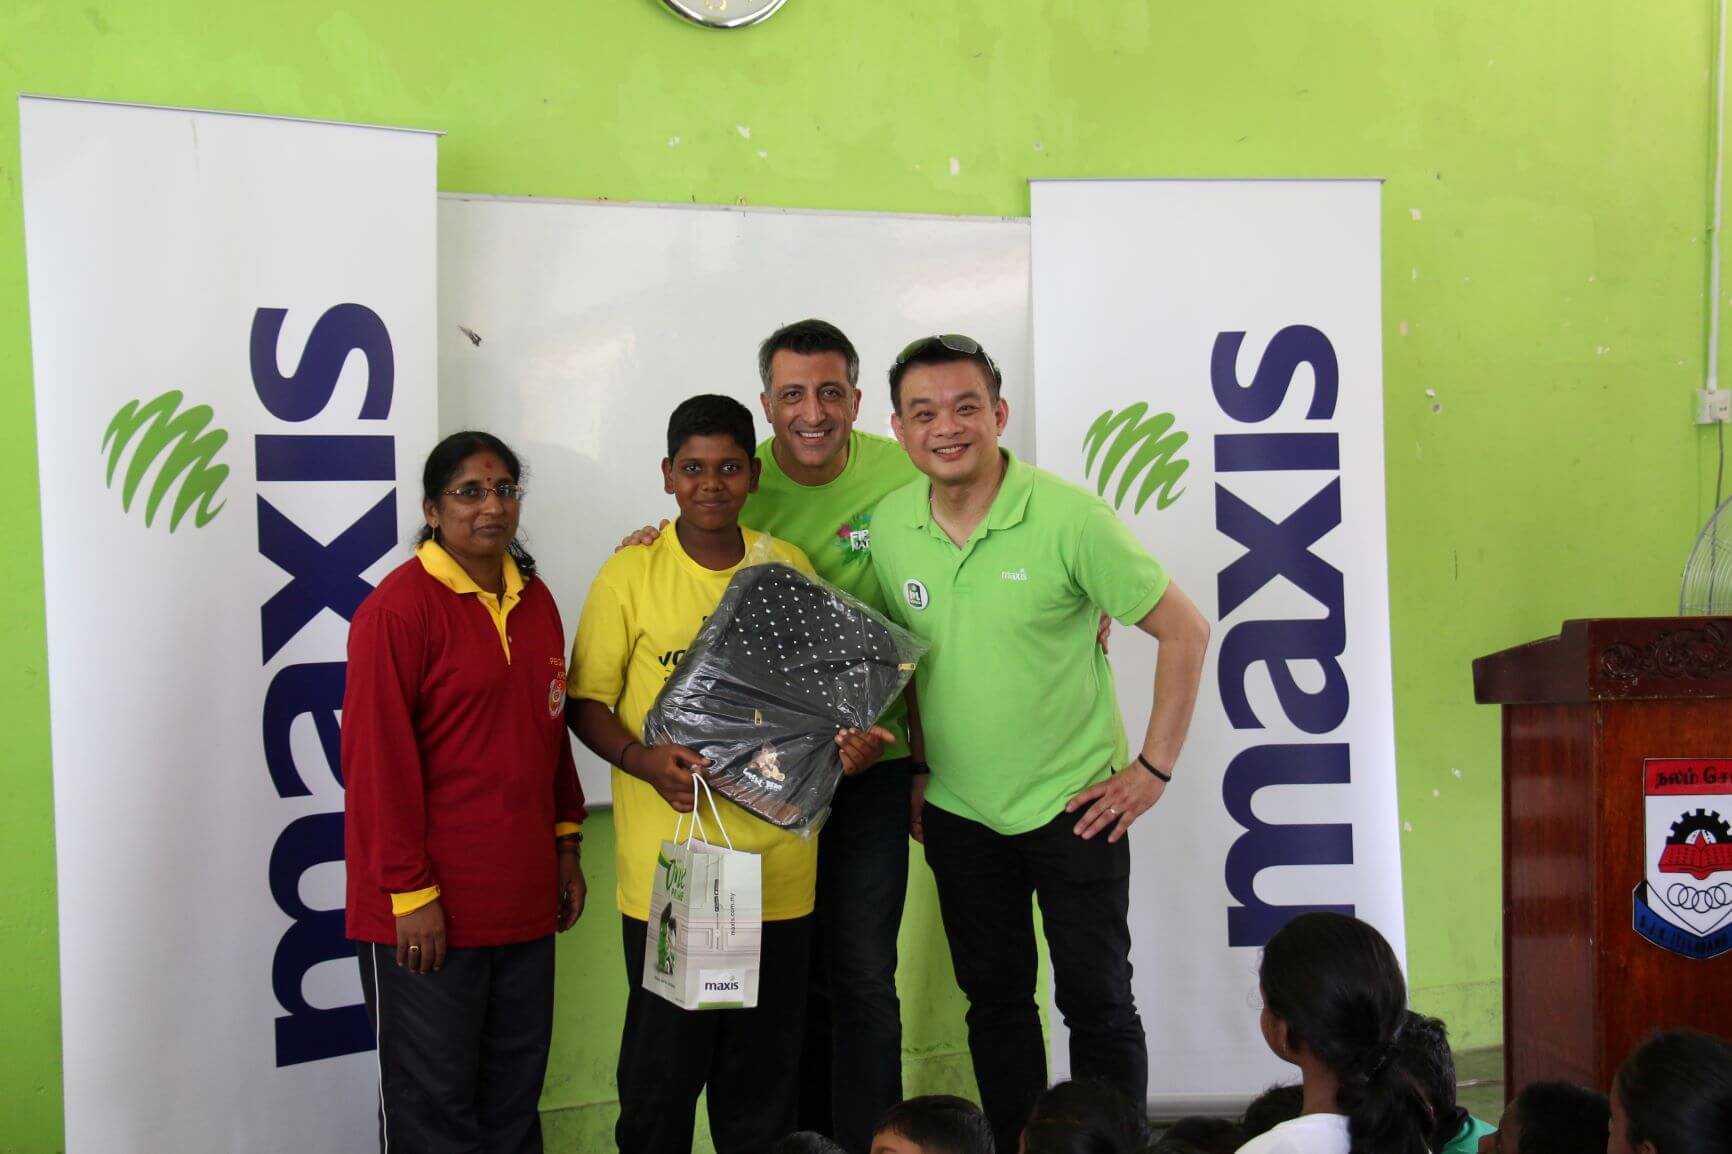 Maxis brings cheer to students of SJKT Ladang Escot in conjunction with Deepavali